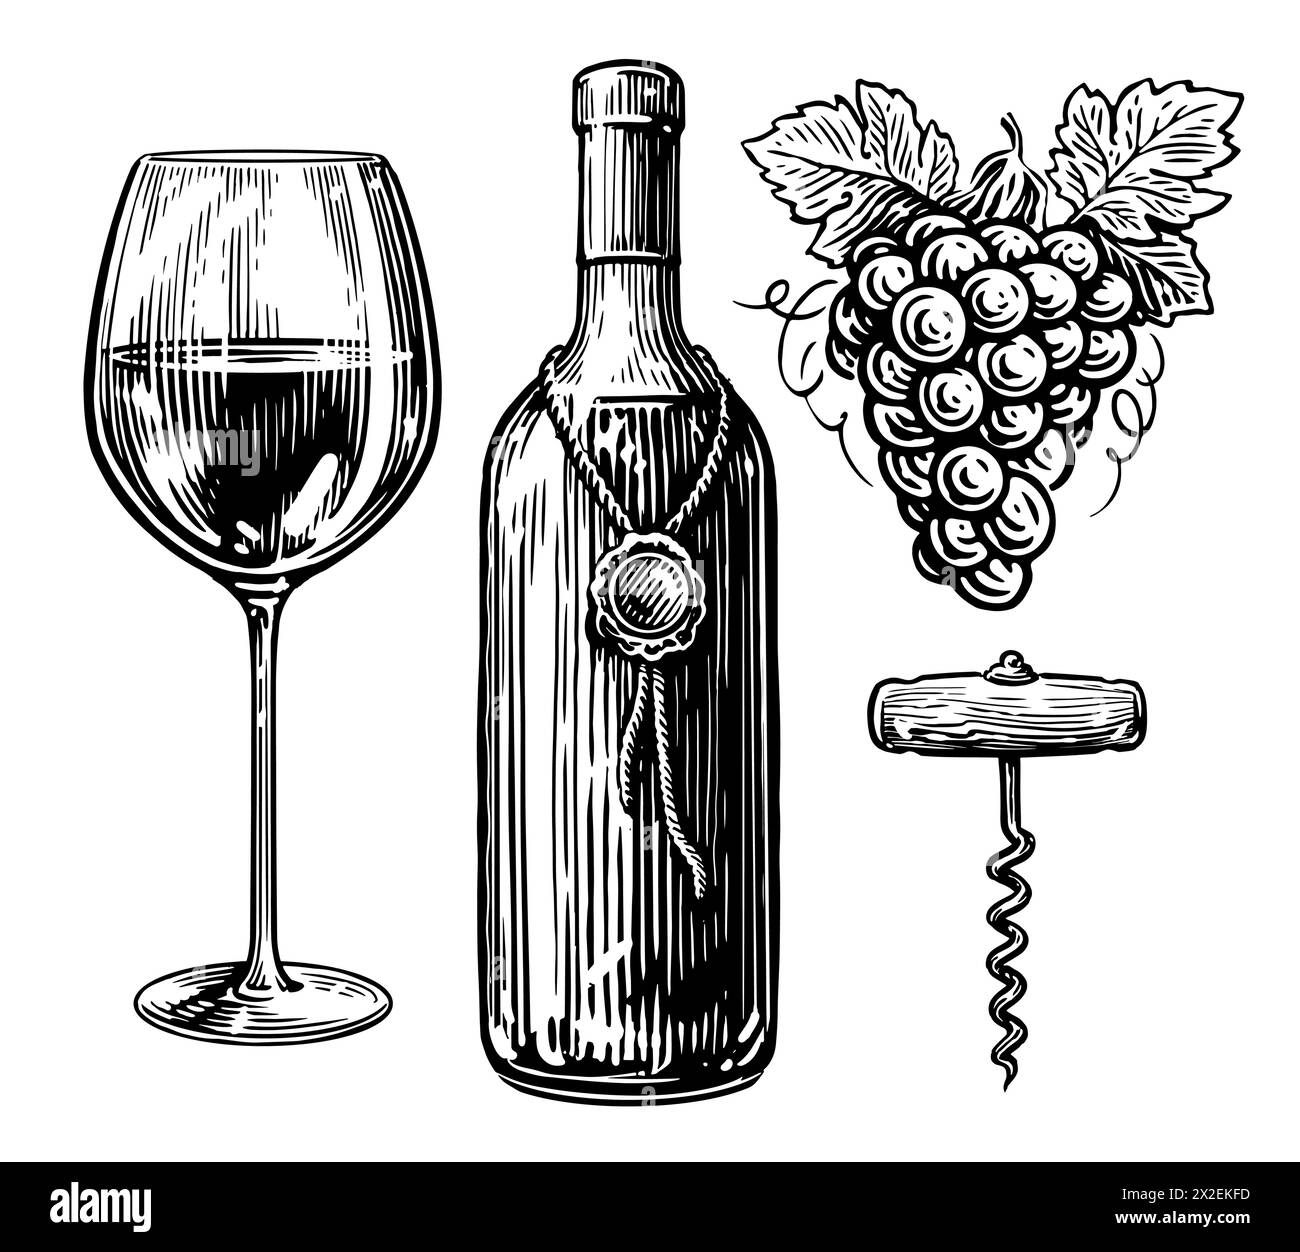 Wine drink concept. Bottle of wine, wineglass, corkscrew and bunch of grapes. Sketch vintage vector illustration Stock Vector